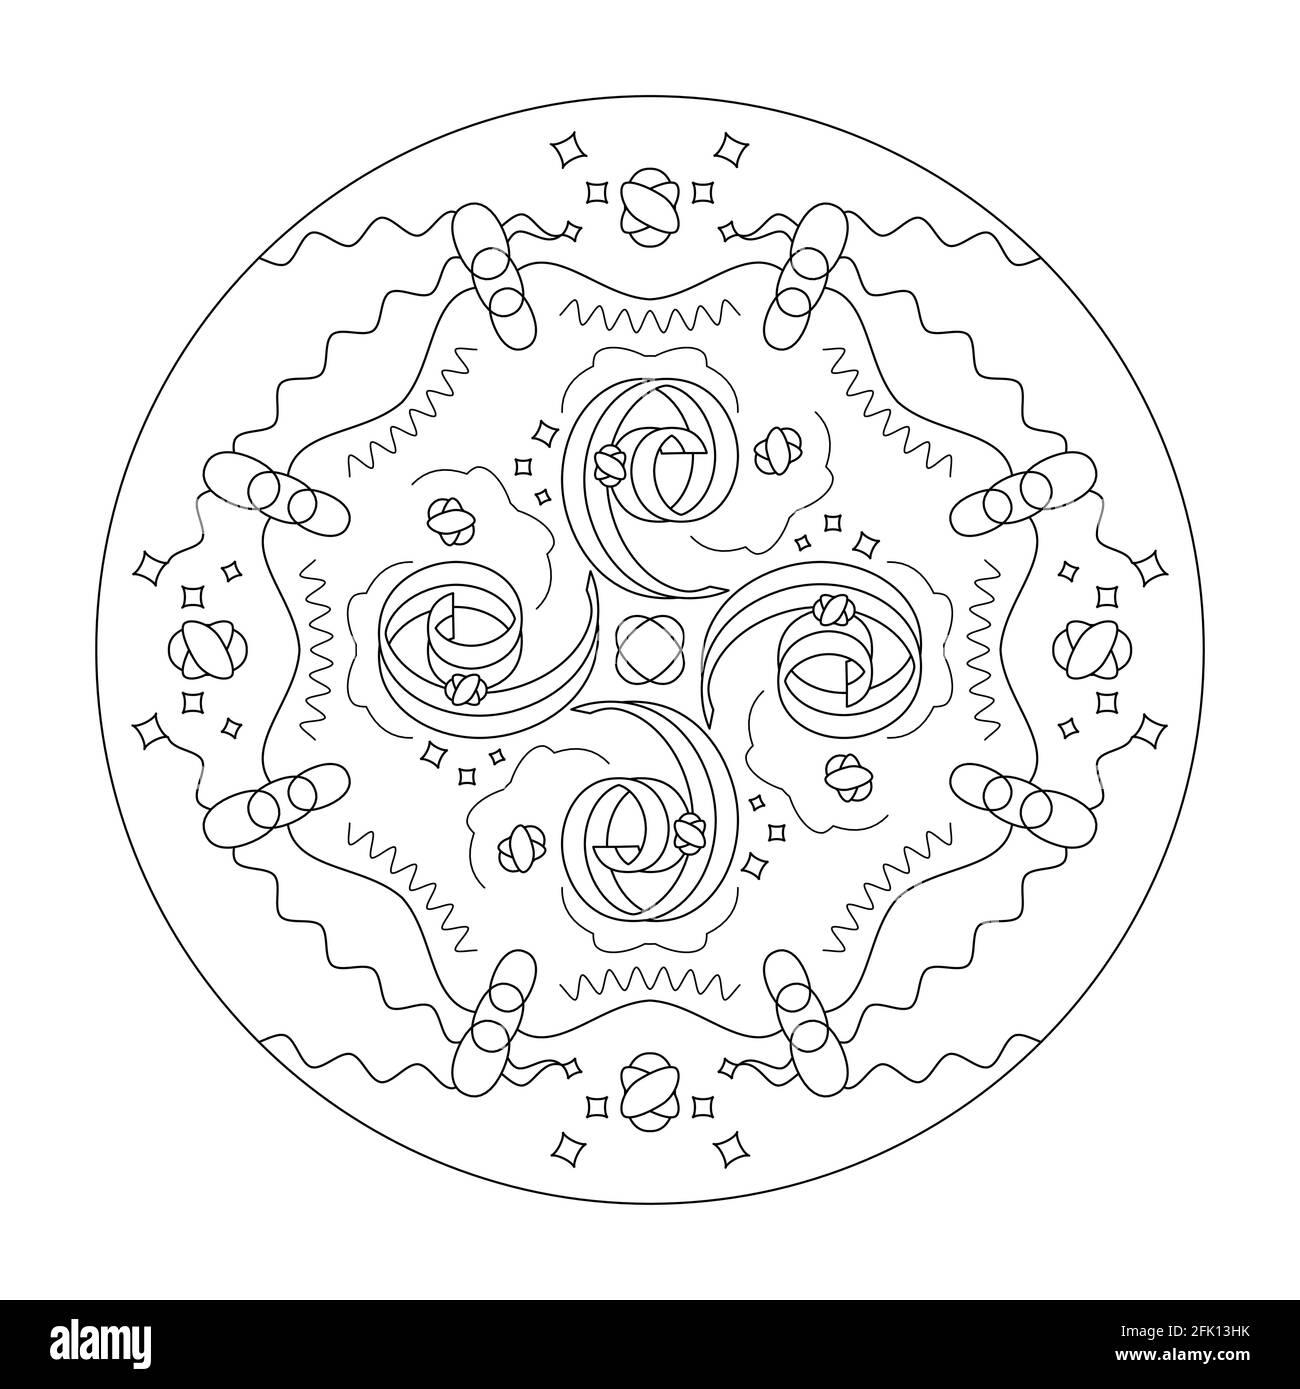 Mandala coloring page. Abstract background with spirals. Art Therapy. Anti-stress. Vector illustration black and white. Stock Vector